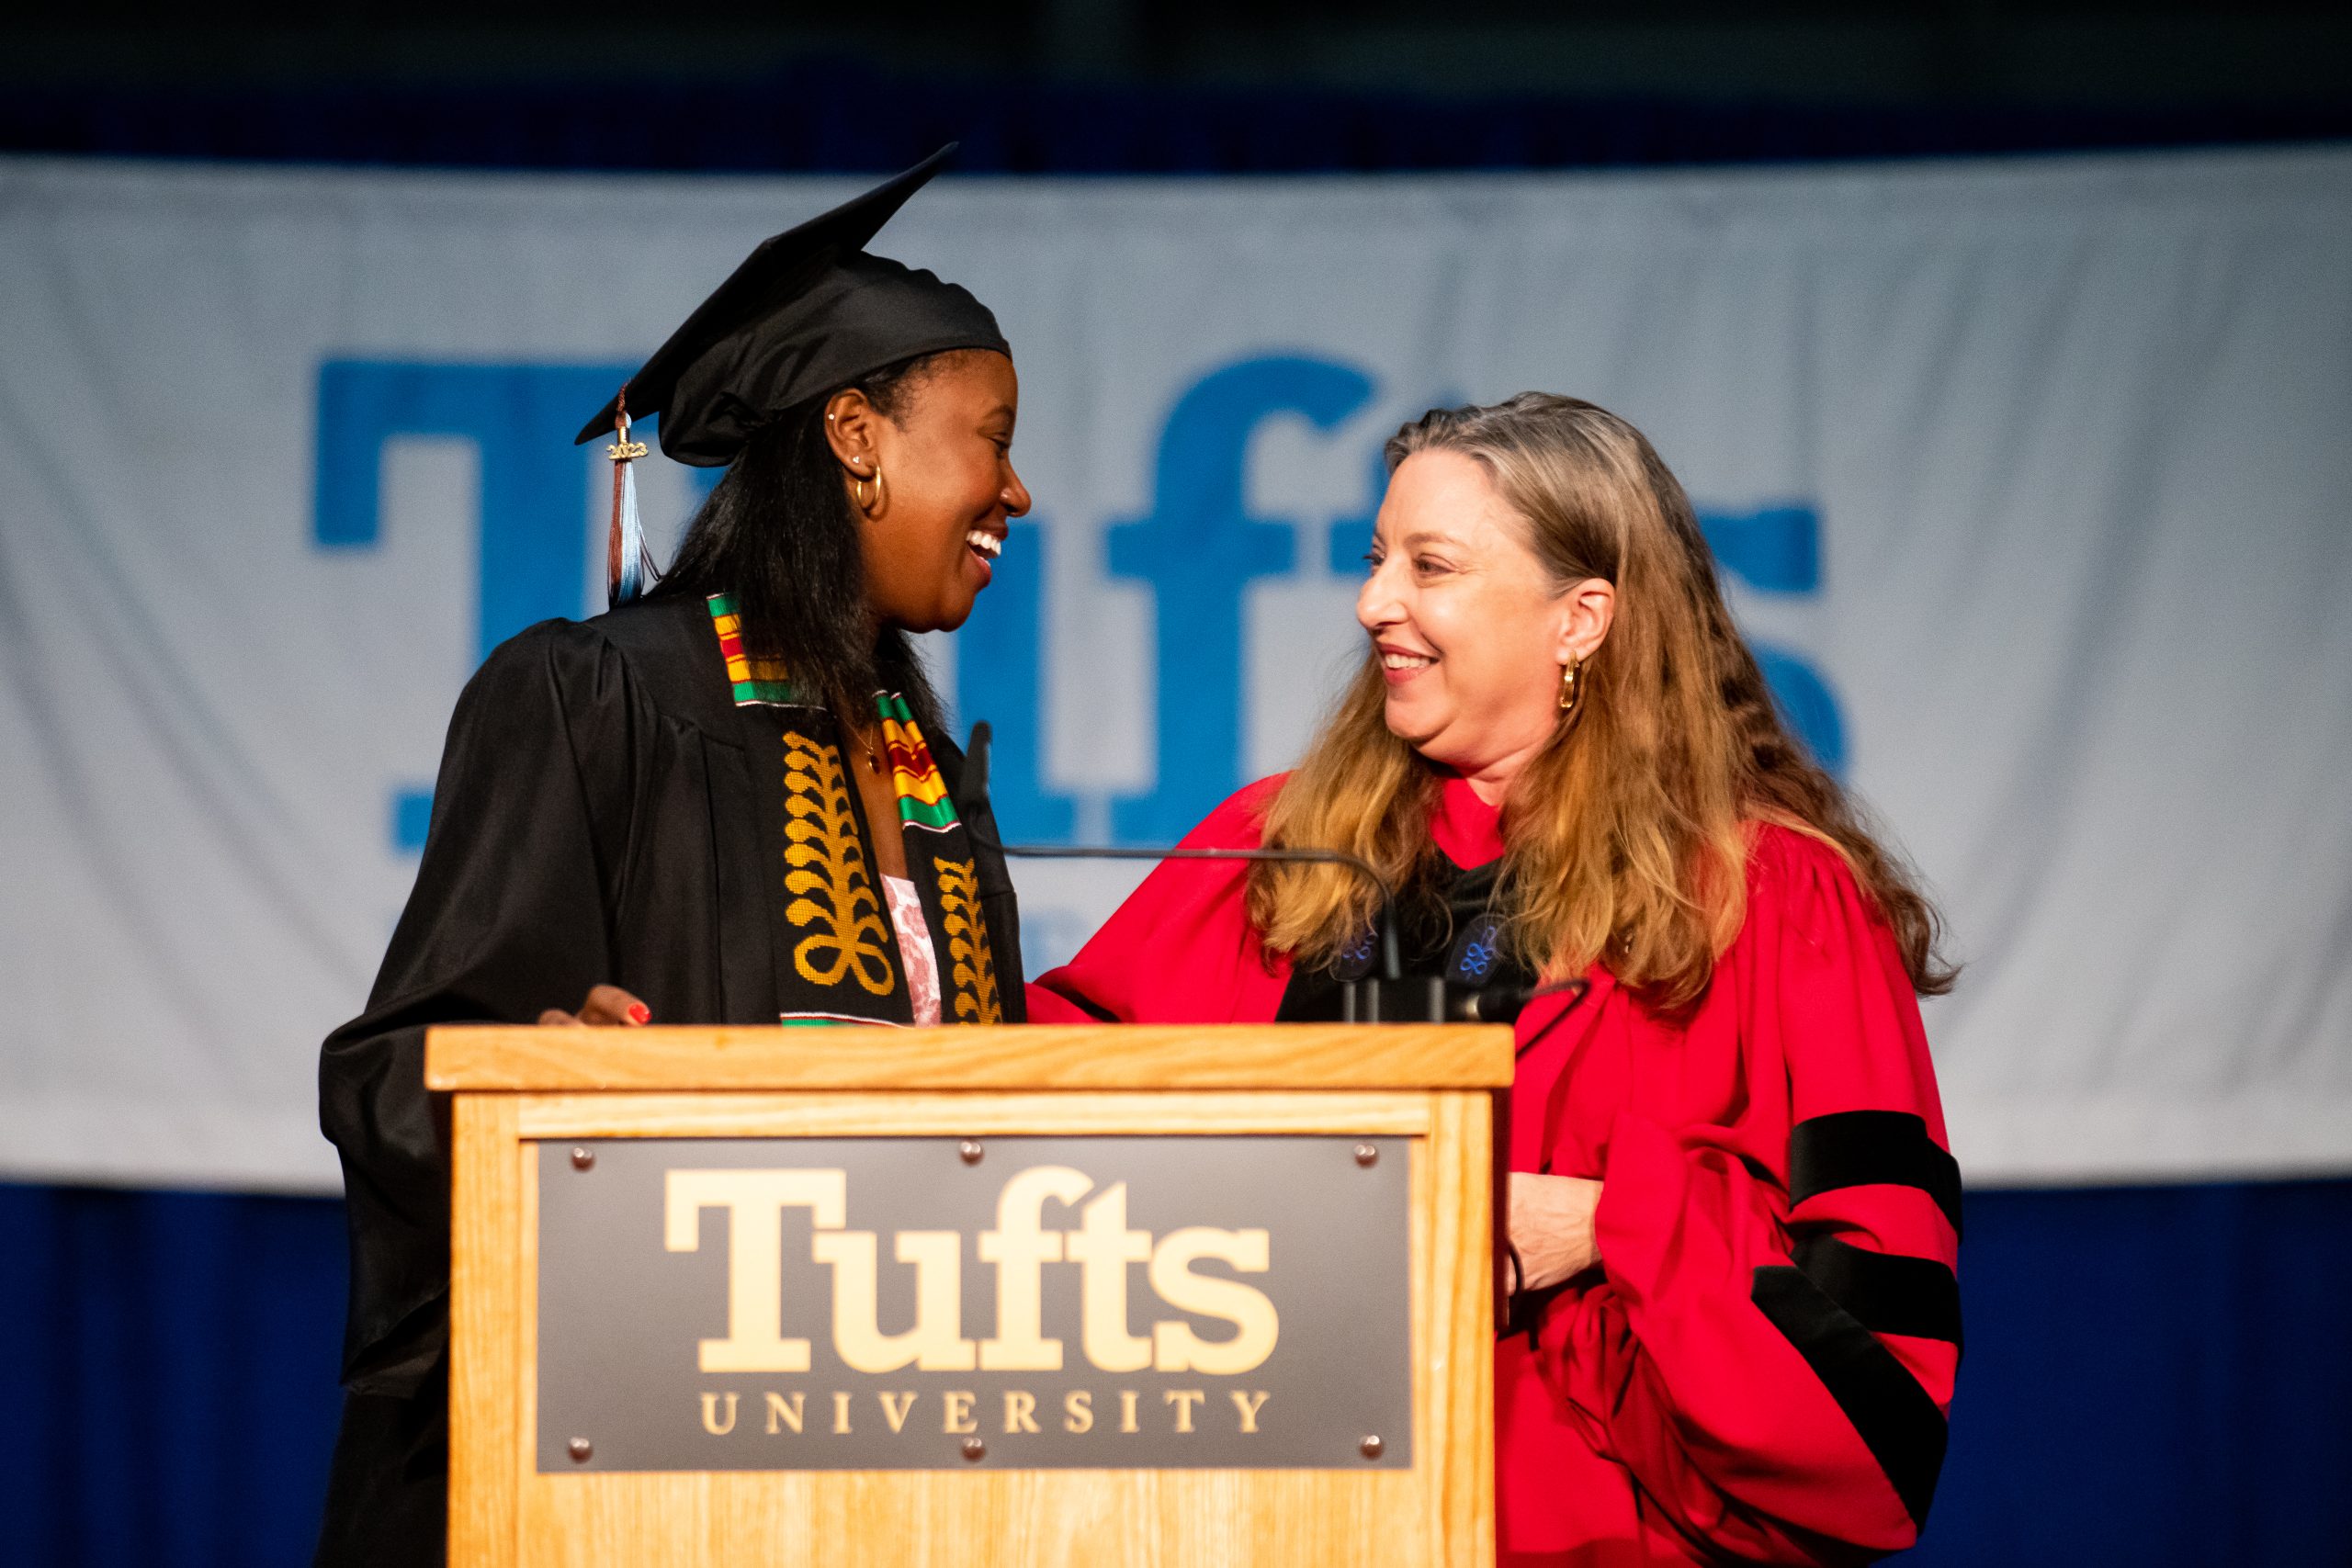 Two people smiling at each other on stage in academic regalia